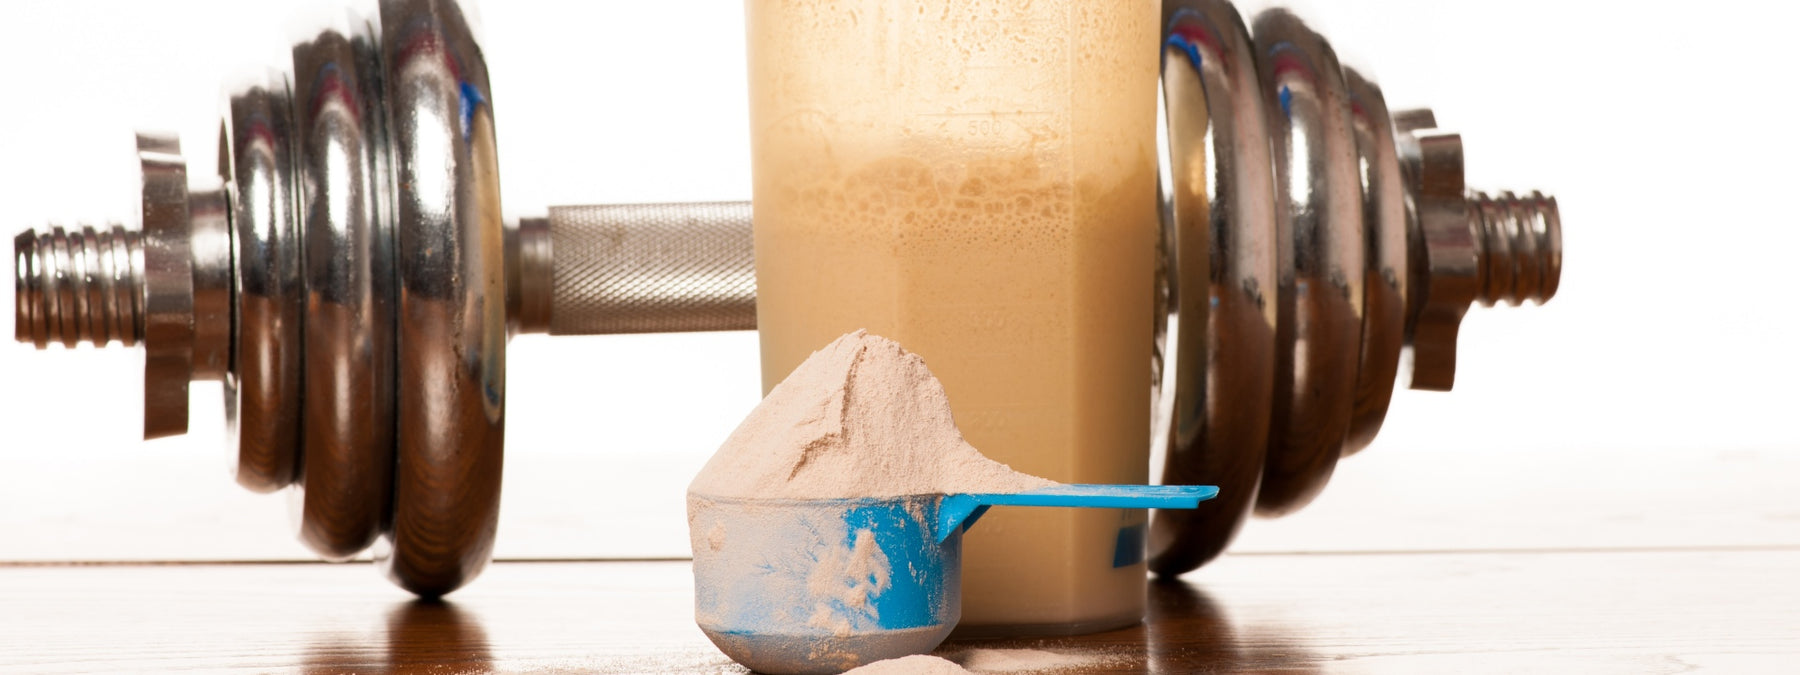 The Last Casein Protein Powder Article You'll Ever Need